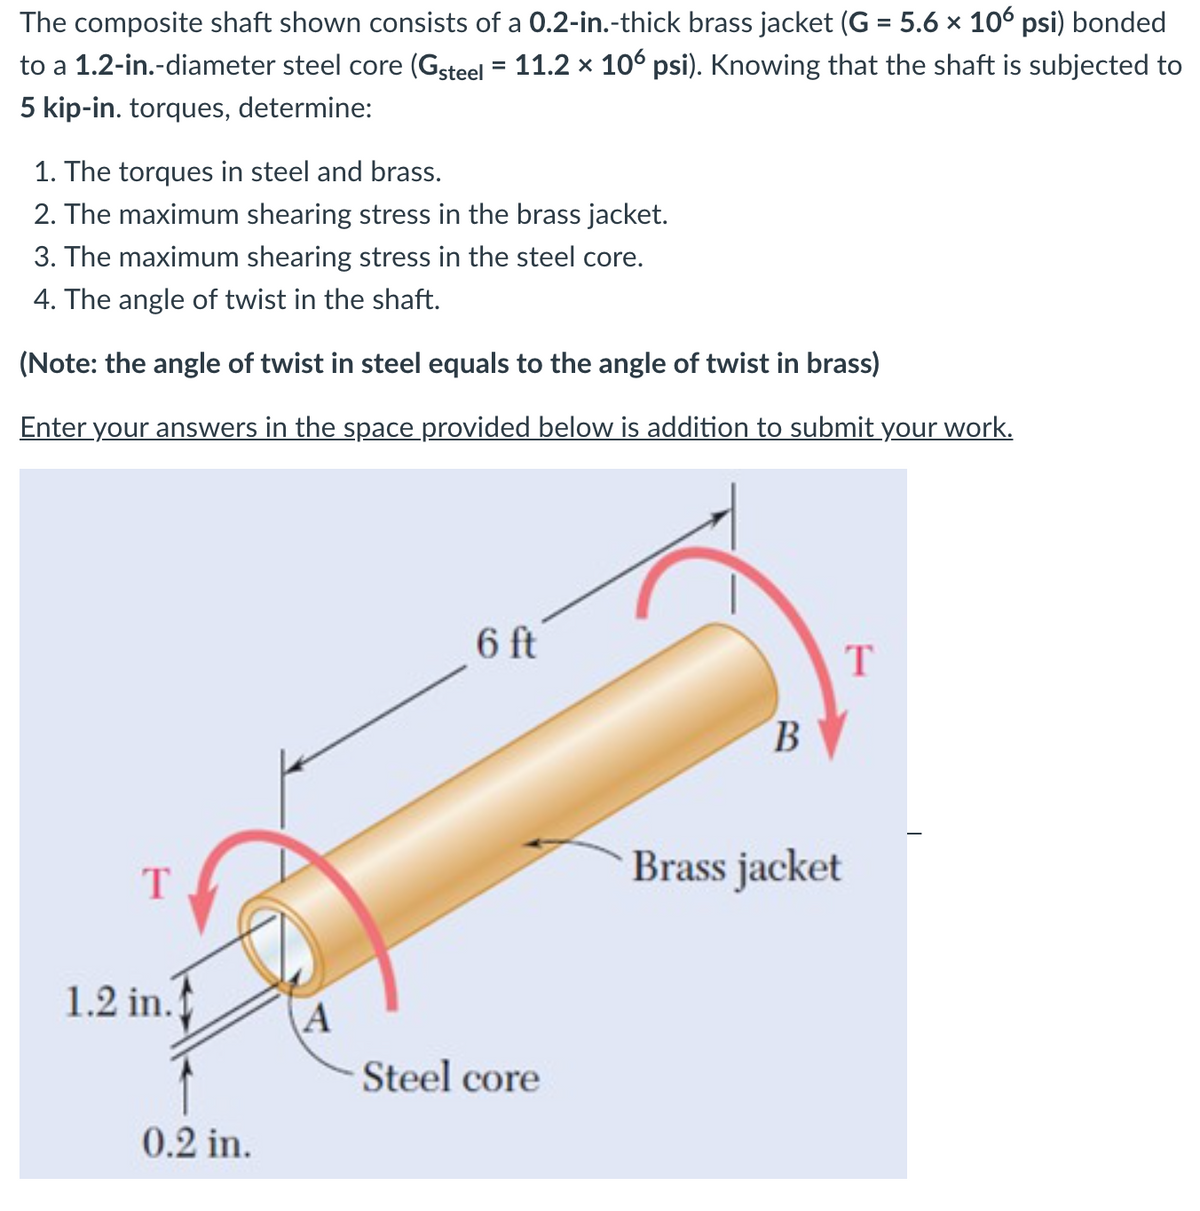 The composite shaft shown consists of a 0.2-in.-thick brass jacket (G = 5.6 x 106 psi) bonded
to a 1.2-in.-diameter steel core (Gsteel = 11.2 × 106 psi). Knowing that the shaft is subjected to
5 kip-in. torques, determine:
1. The torques in steel and brass.
2. The maximum shearing stress in the brass jacket.
3. The maximum shearing stress in the steel core.
4. The angle of twist in the shaft.
(Note: the angle of twist in steel equals to the angle of twist in brass)
Enter your answers in the space provided below is addition to submit your work.
6 ft
T
B.
Brass jacket
T
1.2 in.
A
Steel core
0.2 in.
